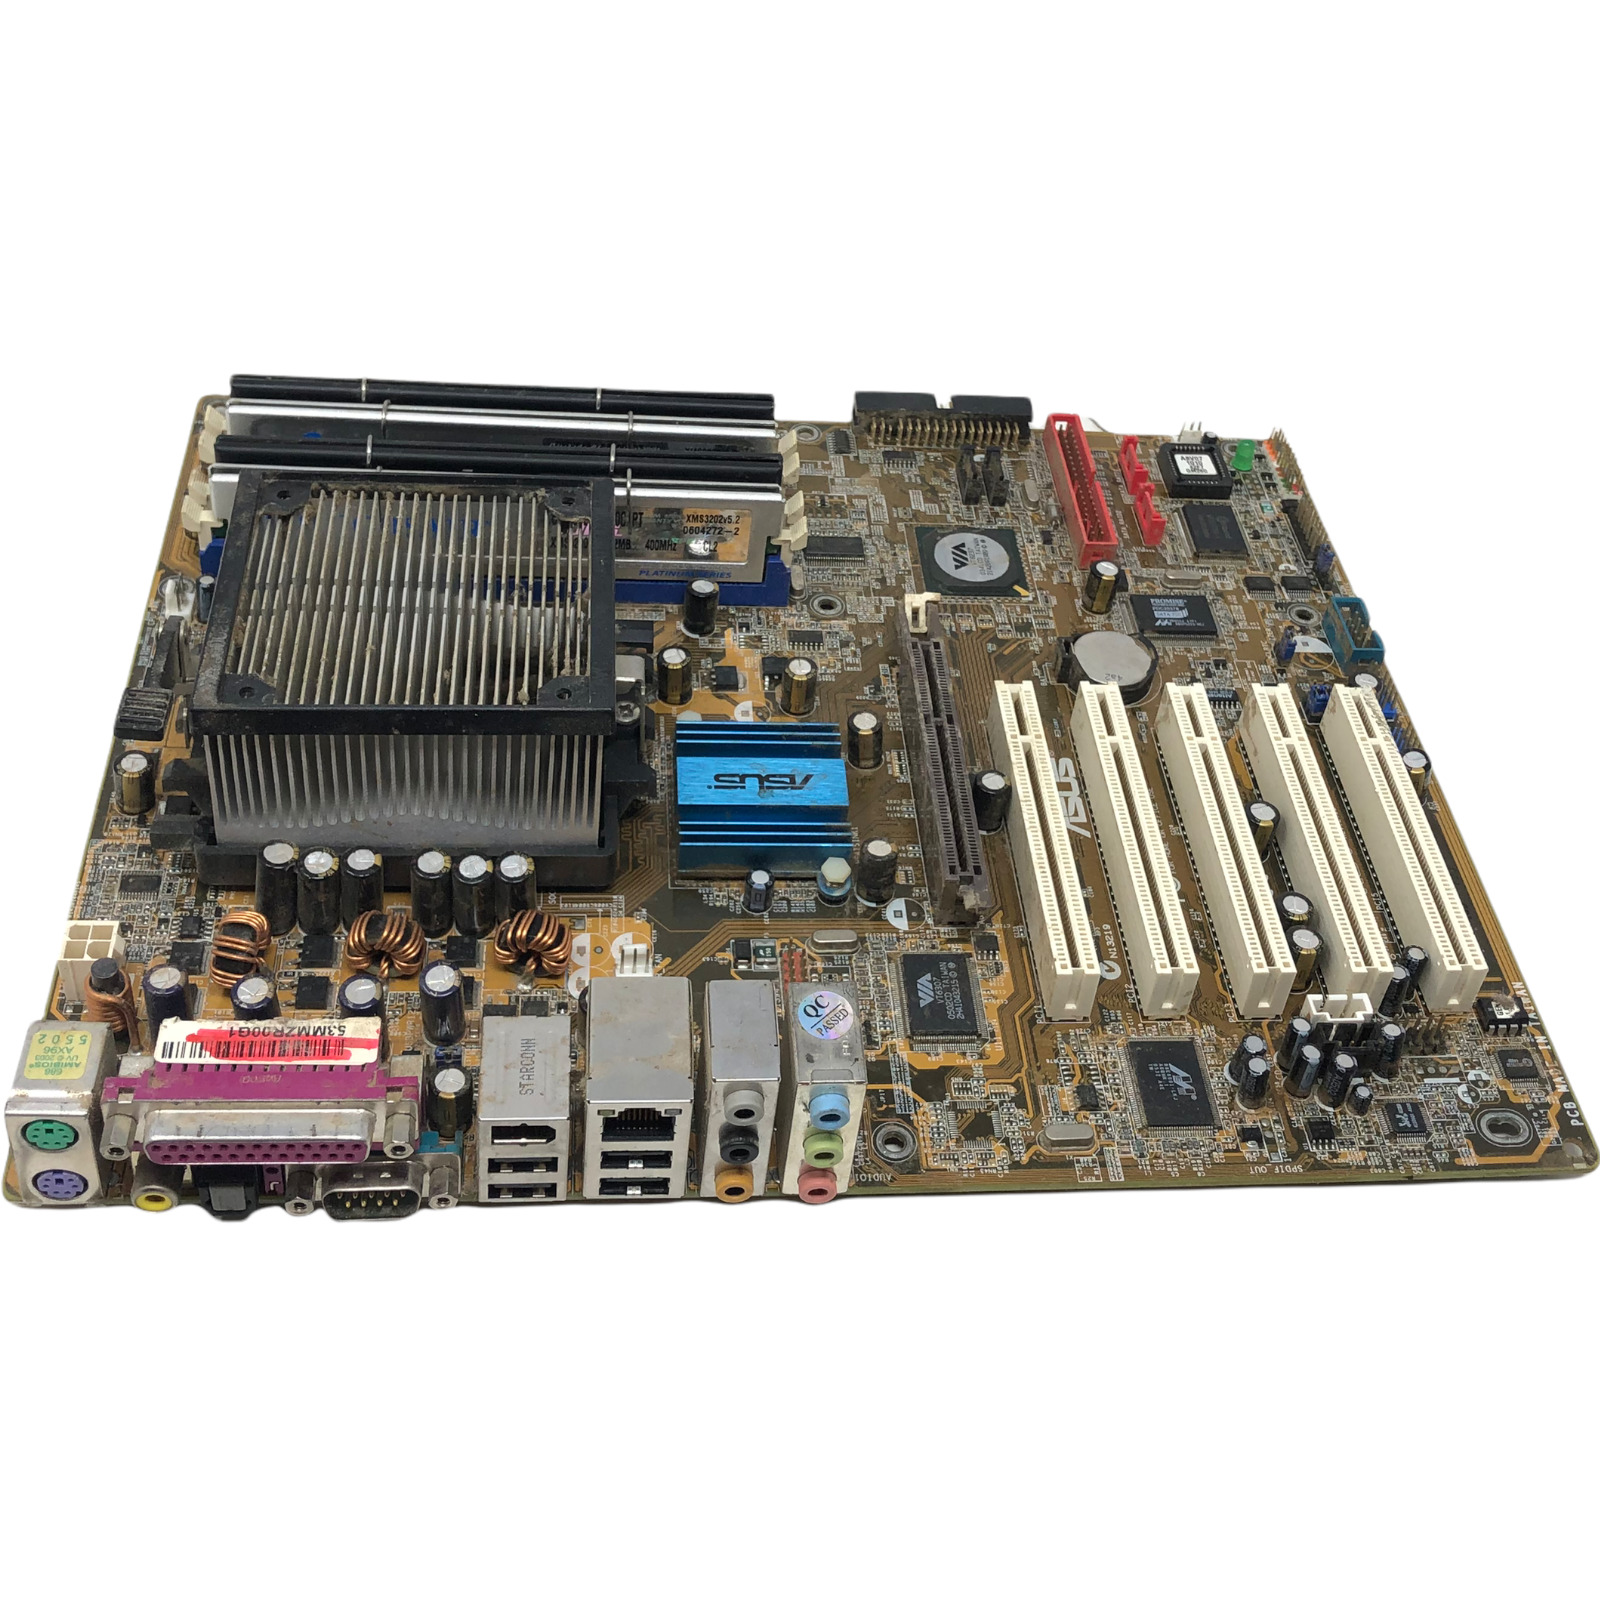 ASUS Motherboard N13219 for Parts Untested Corsair Promise Computer 